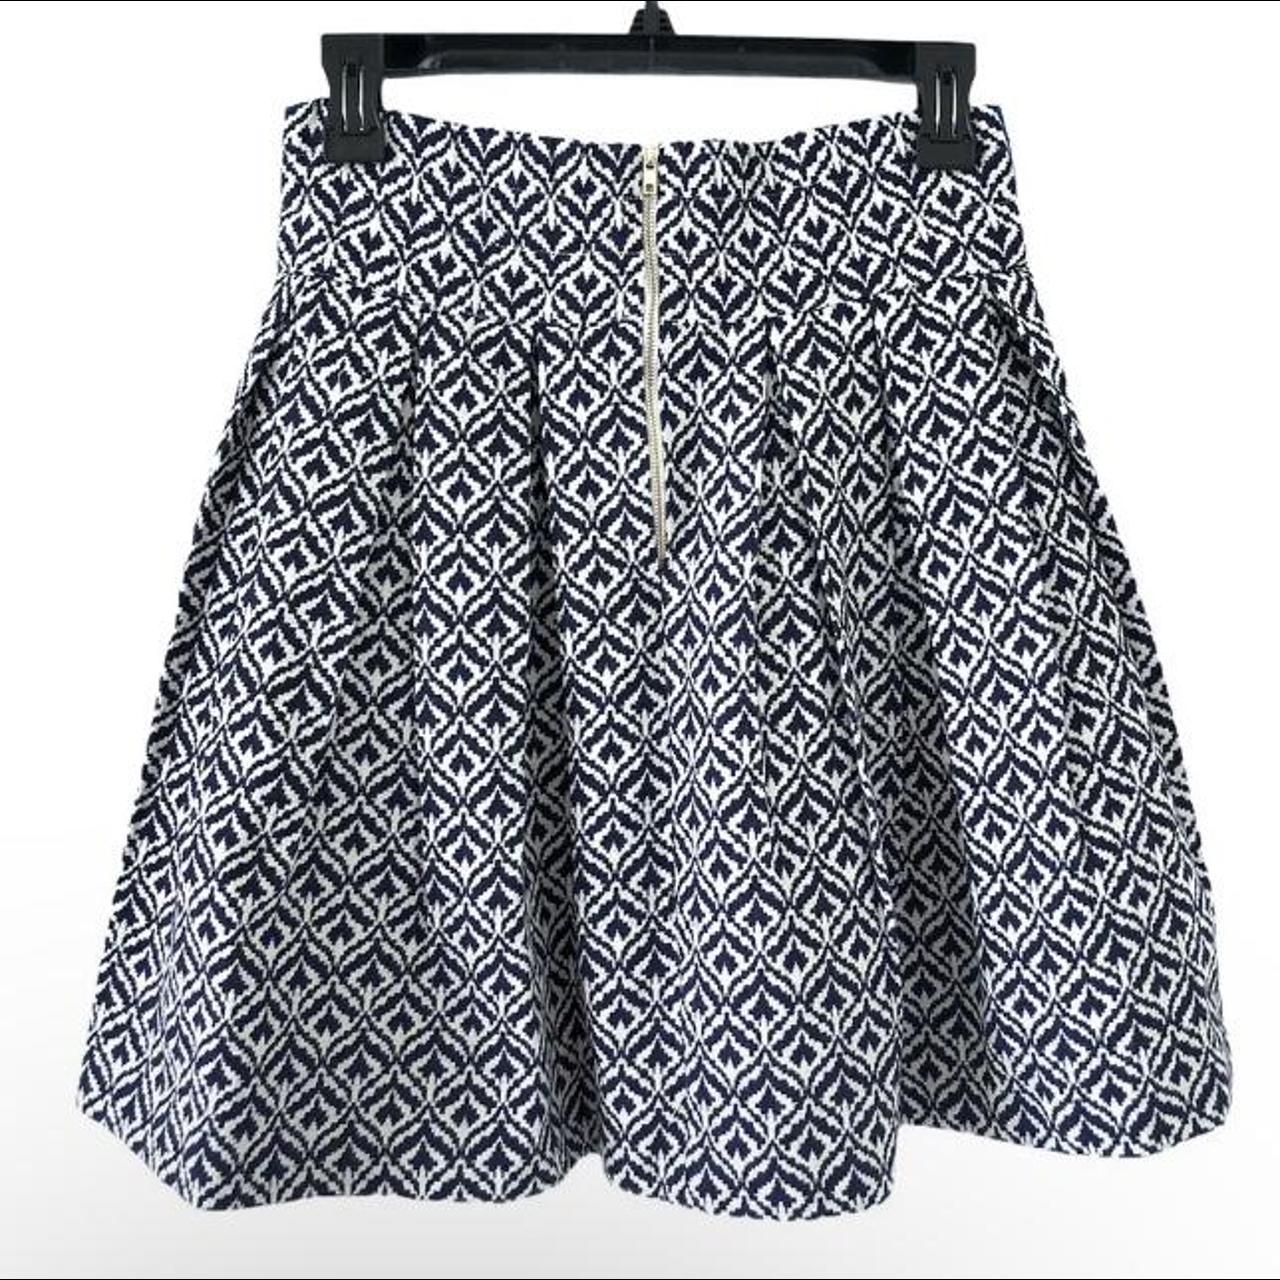 Product Image 2 - Sister Jane Skirt Size M.

A-line